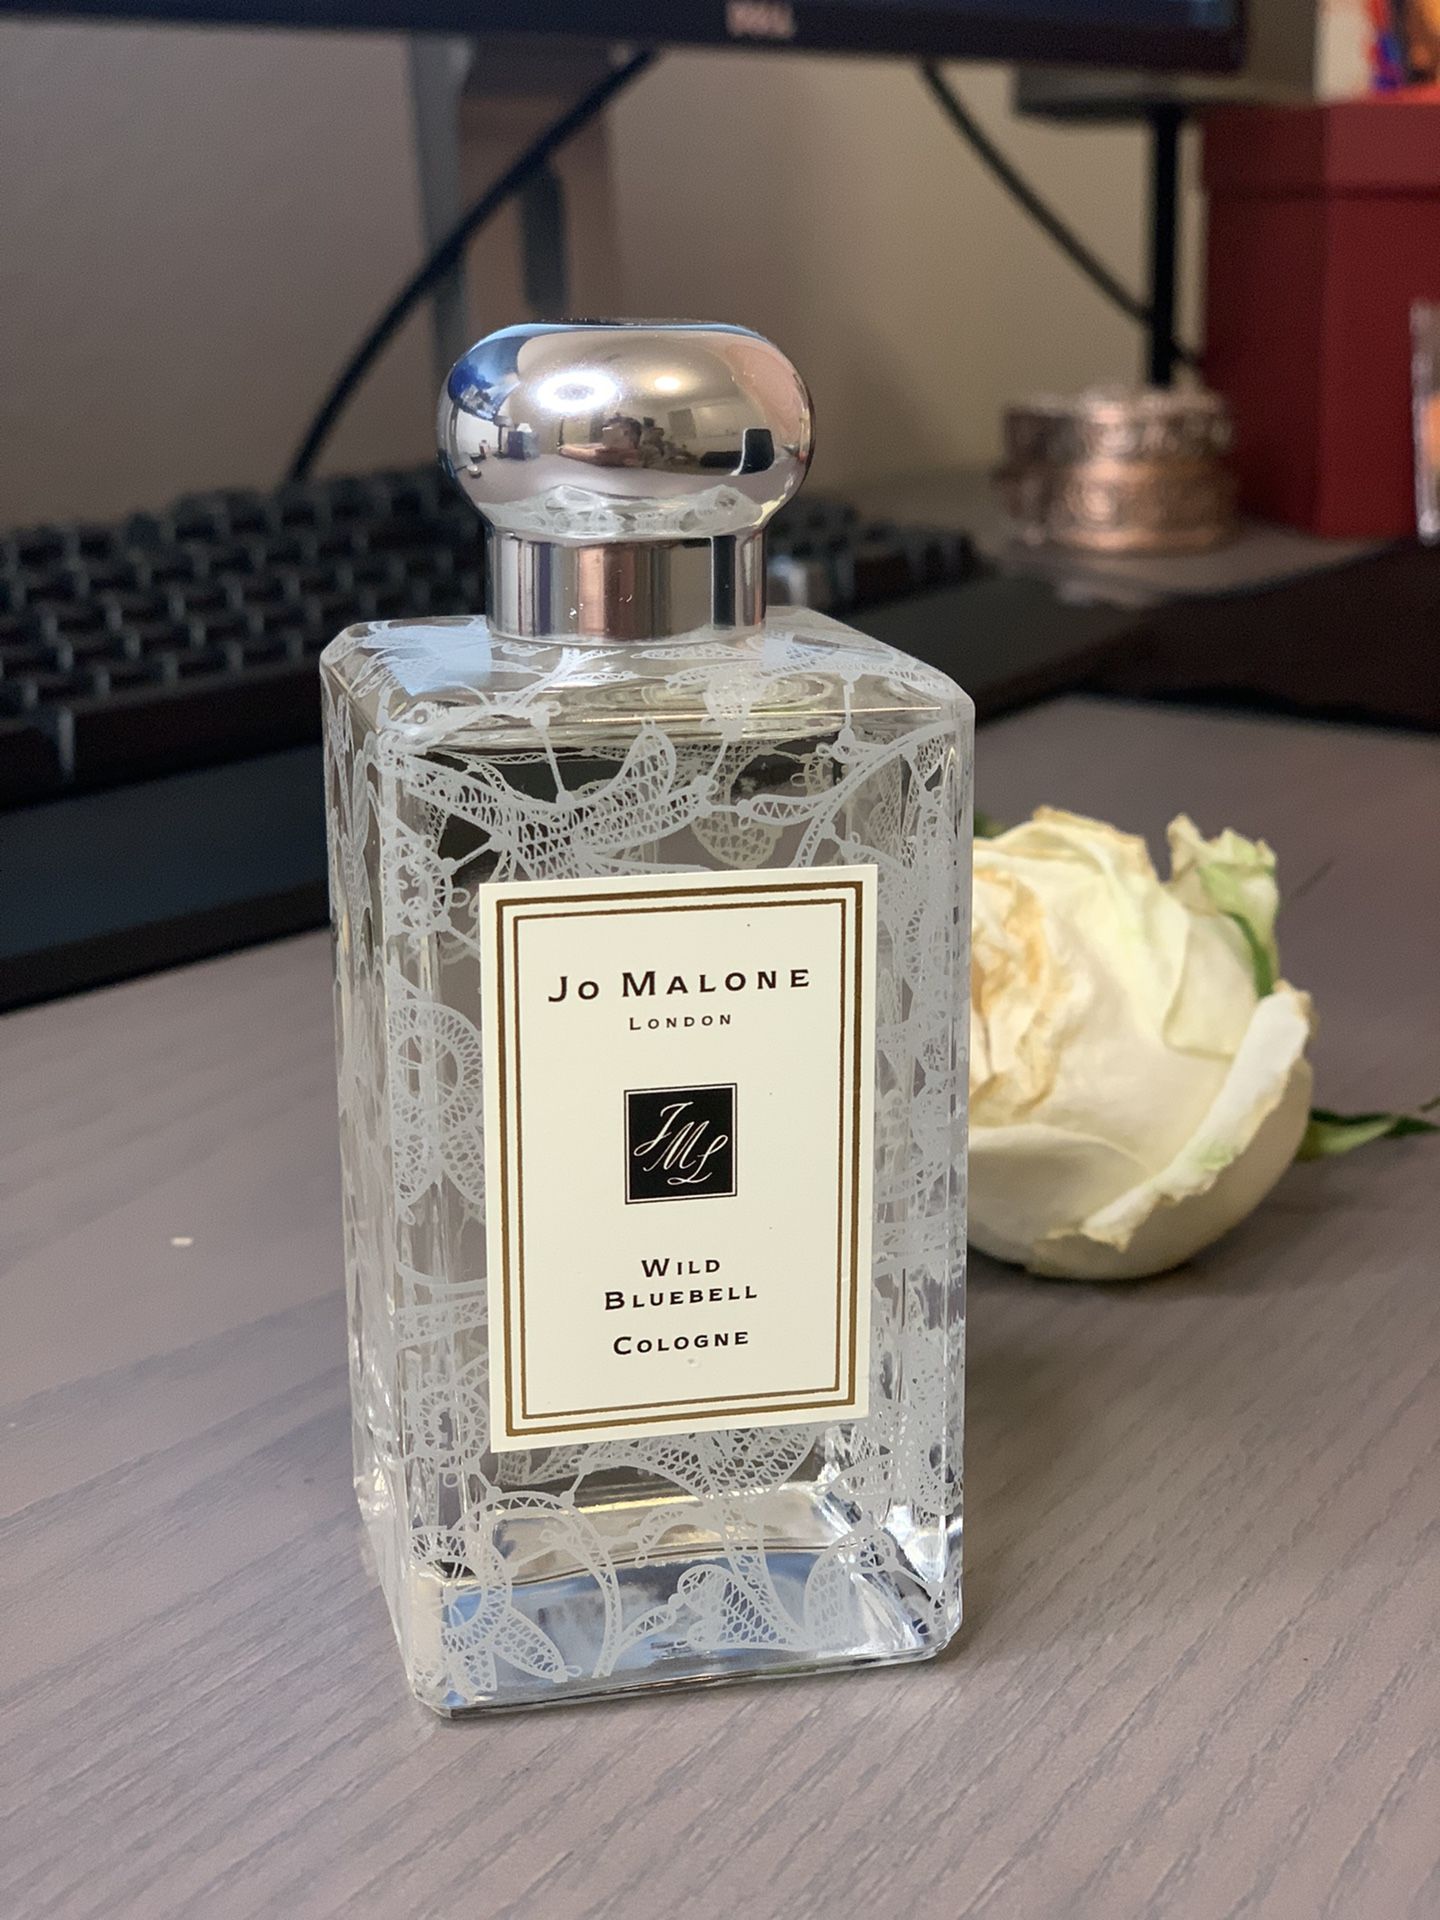 Jo Malone special edition. Wild bluebell cologne